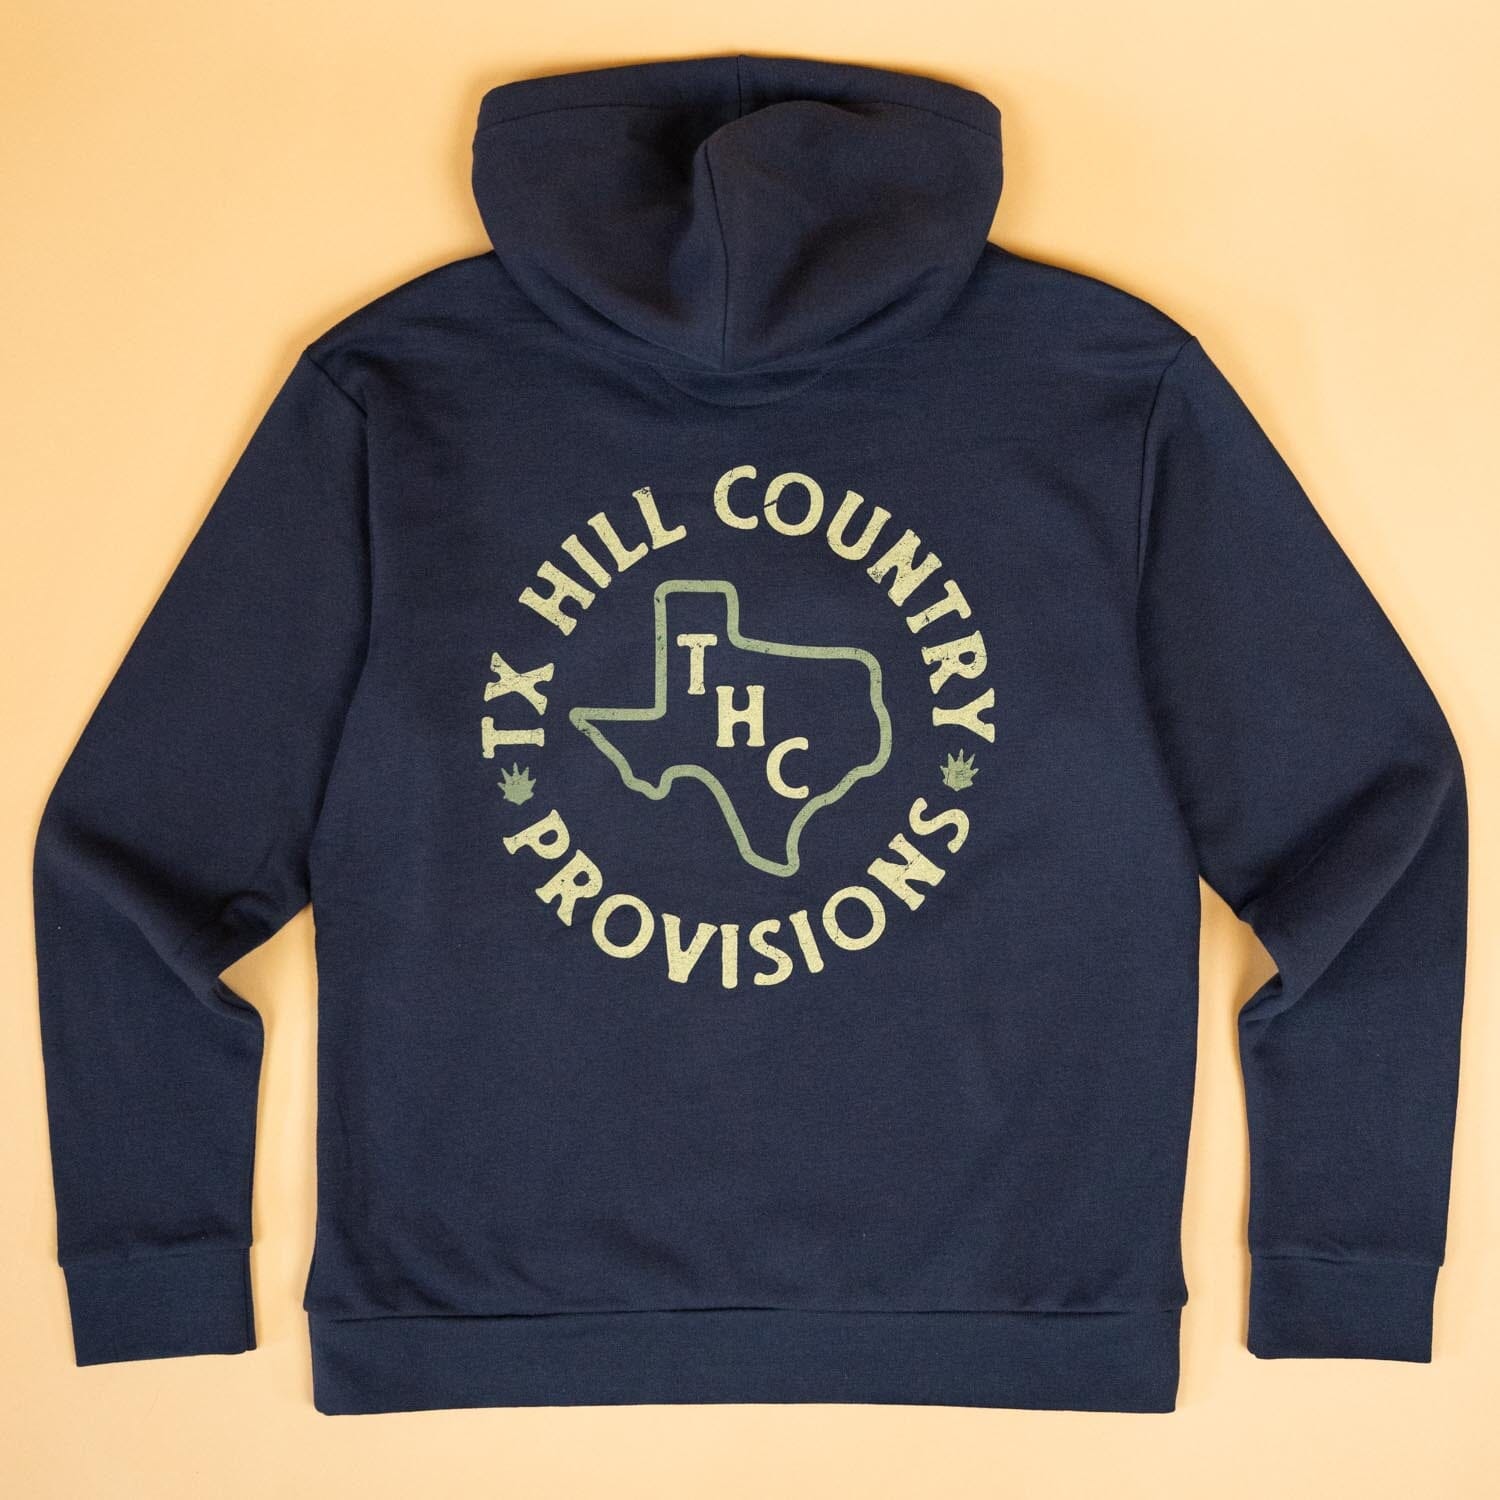 THC In Texas Campfire Hoodie Texas Hill Country Provisions Faded Navy S 